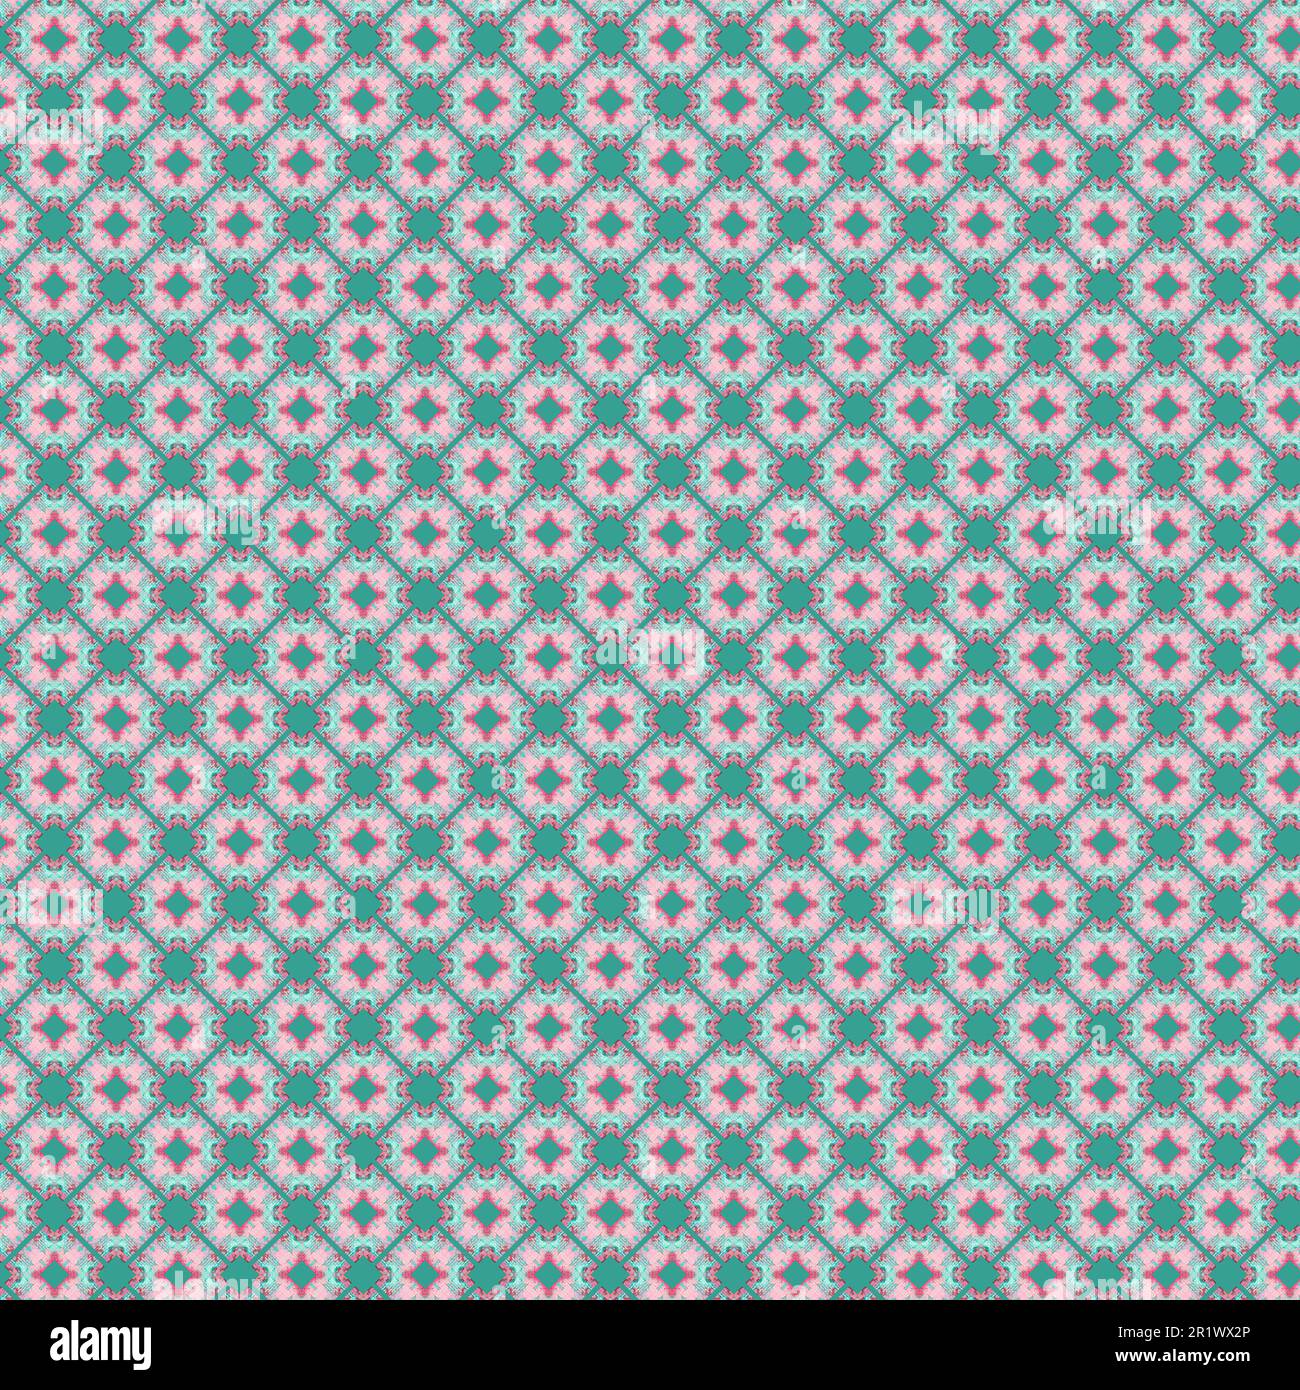 Small round geometric shapes with floral motif for spring summer seamless repeating pattern in pastel pink and aqua turquoise abstract background Stock Photo